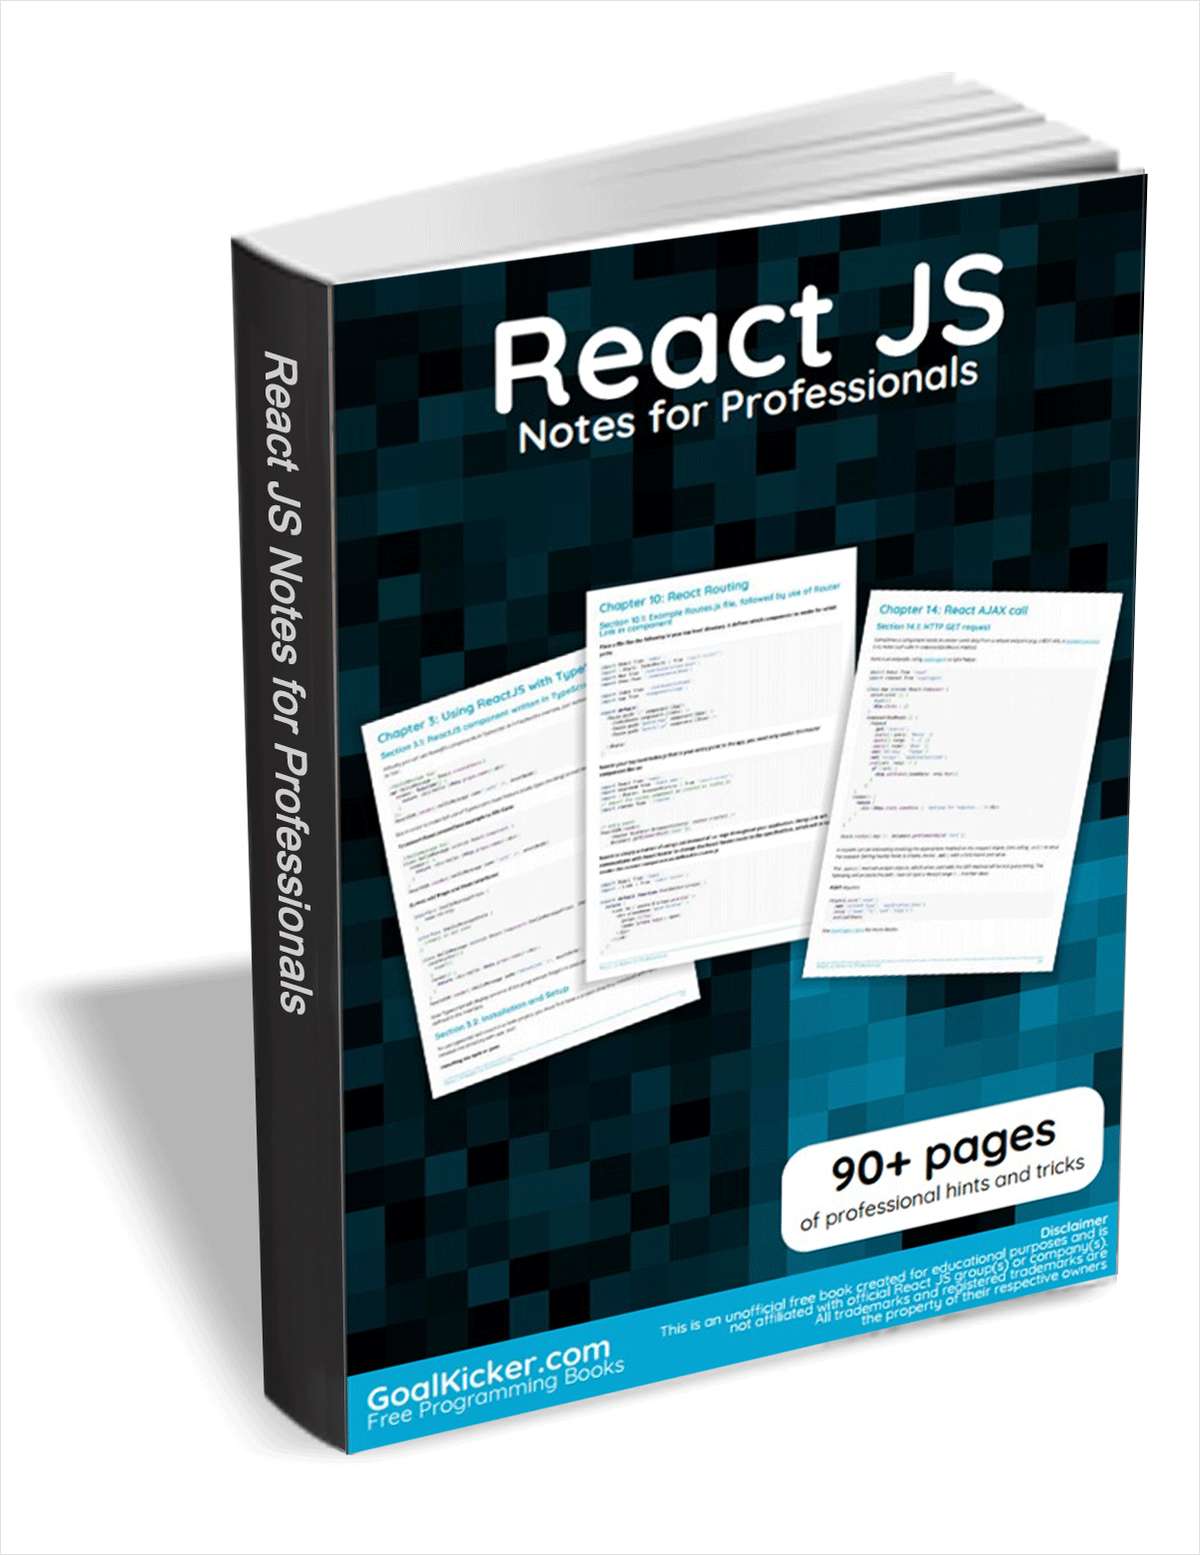 React JS Notes for Professionals